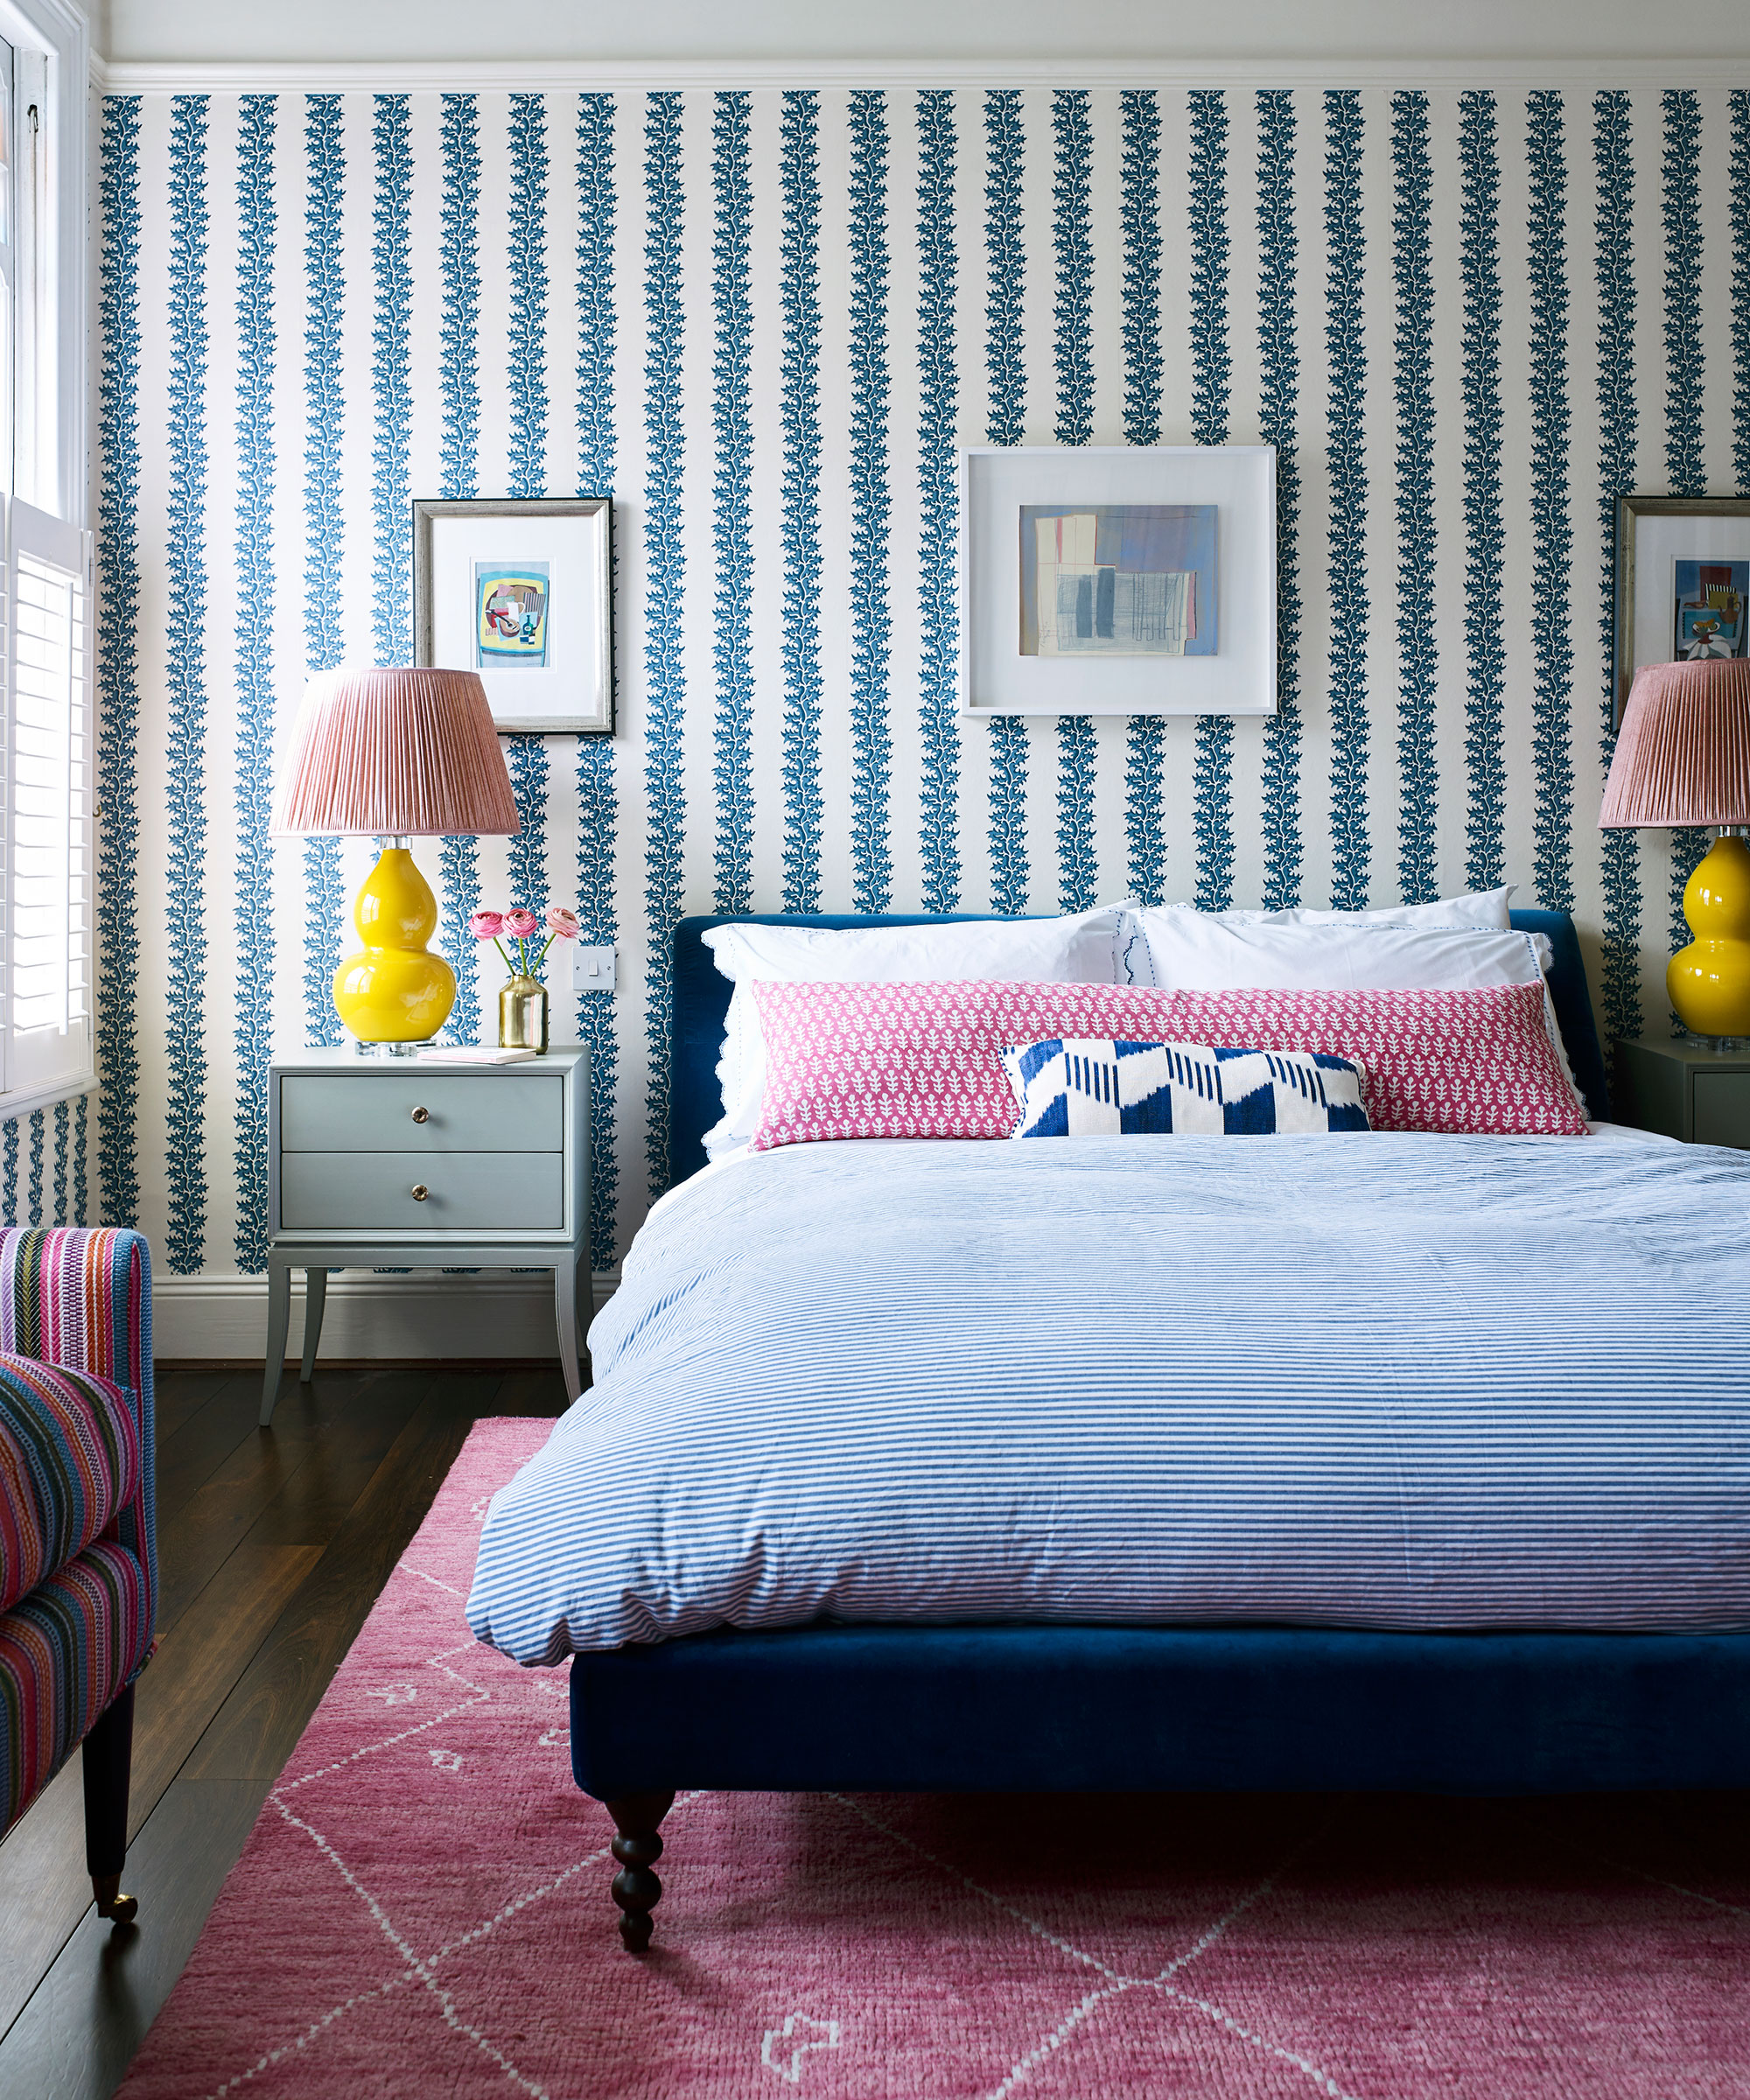 A colorful bedroom in shades of pink and blue with yellow and pink bedside lamps